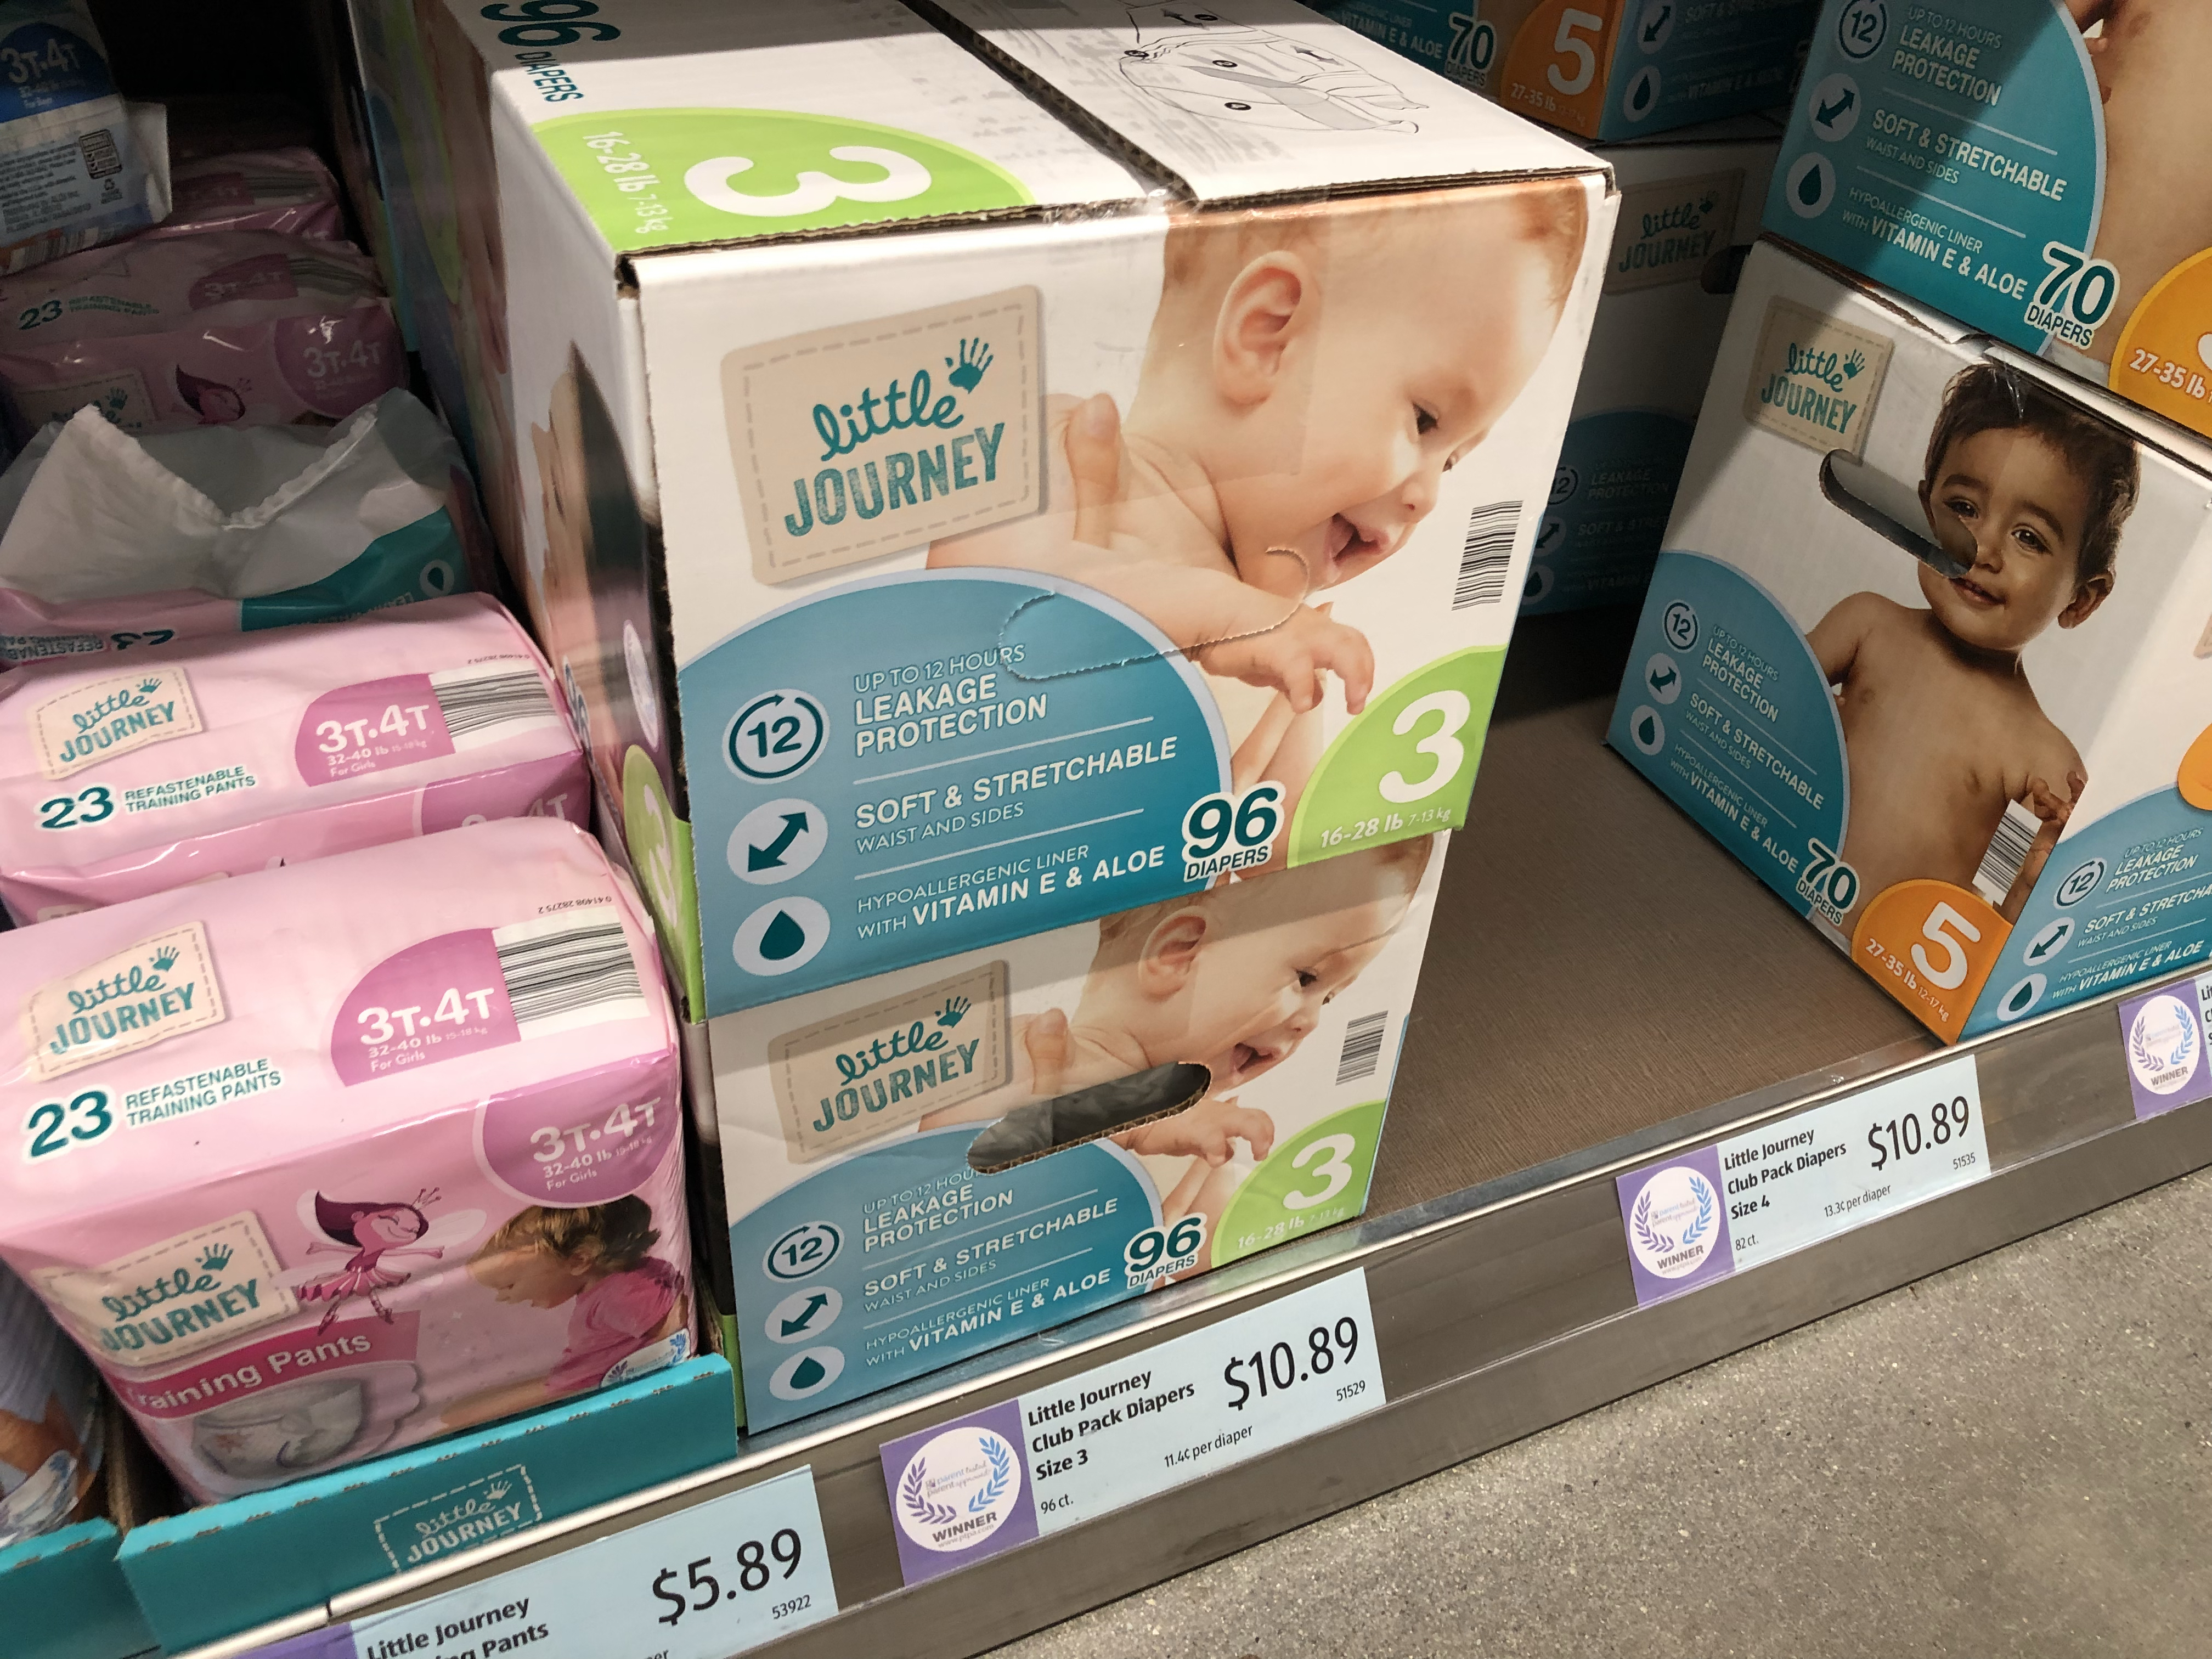 If you love Aldi, you'll love deals on toilet paper and these Little Journey diapers.